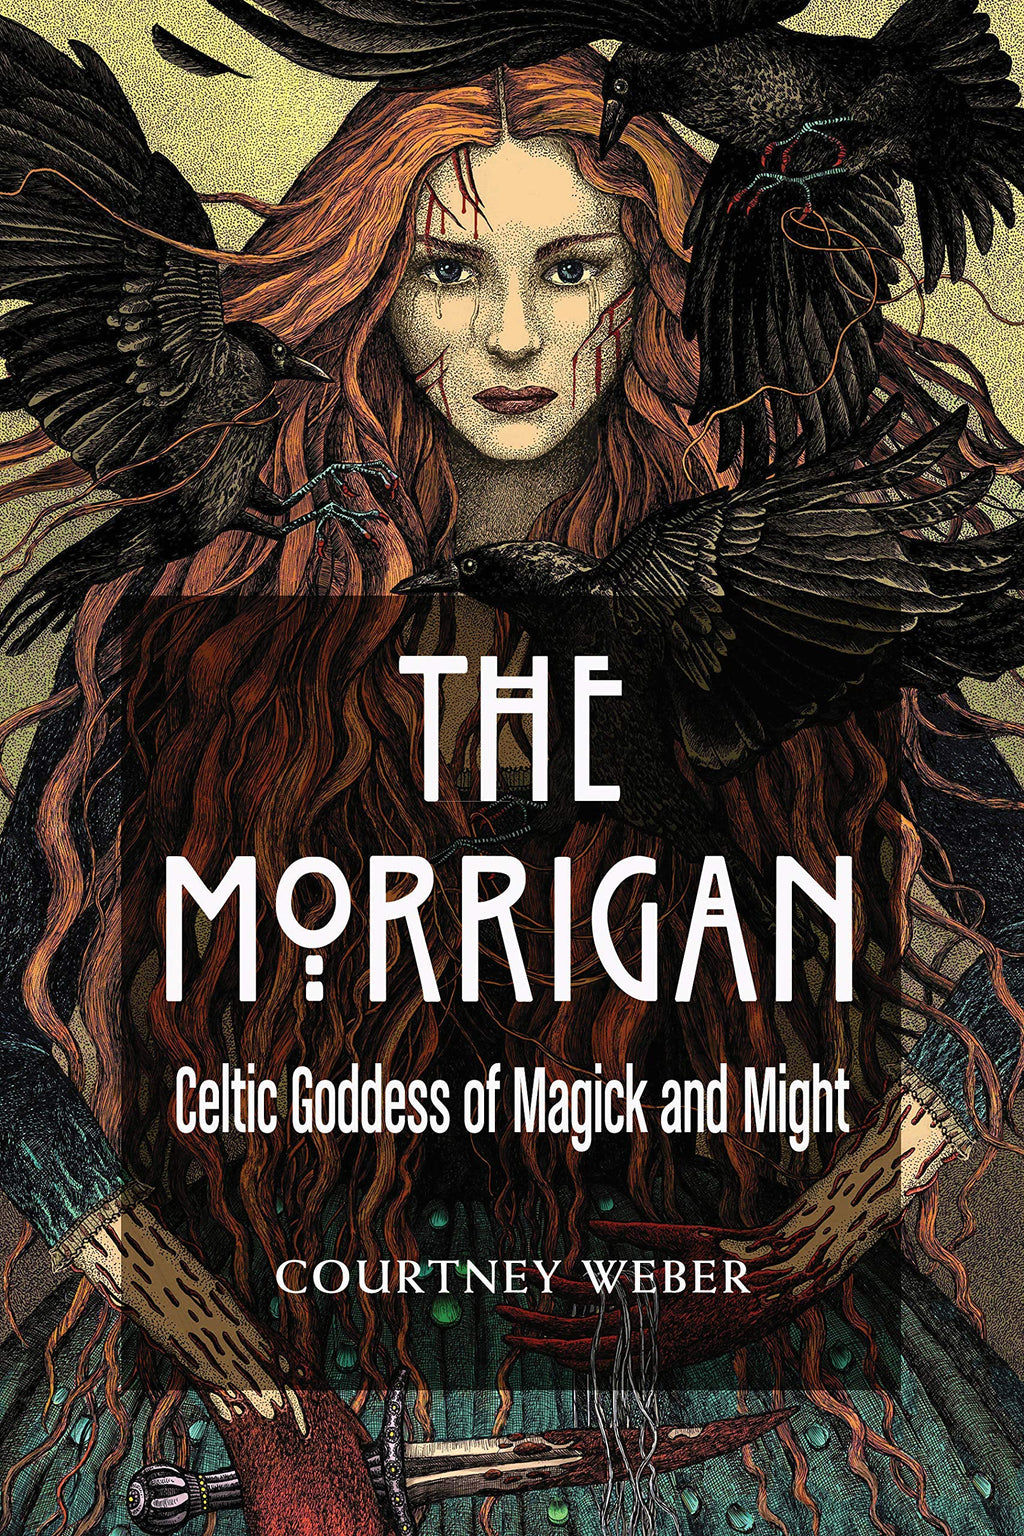 The Morrigan by Courtney Weber